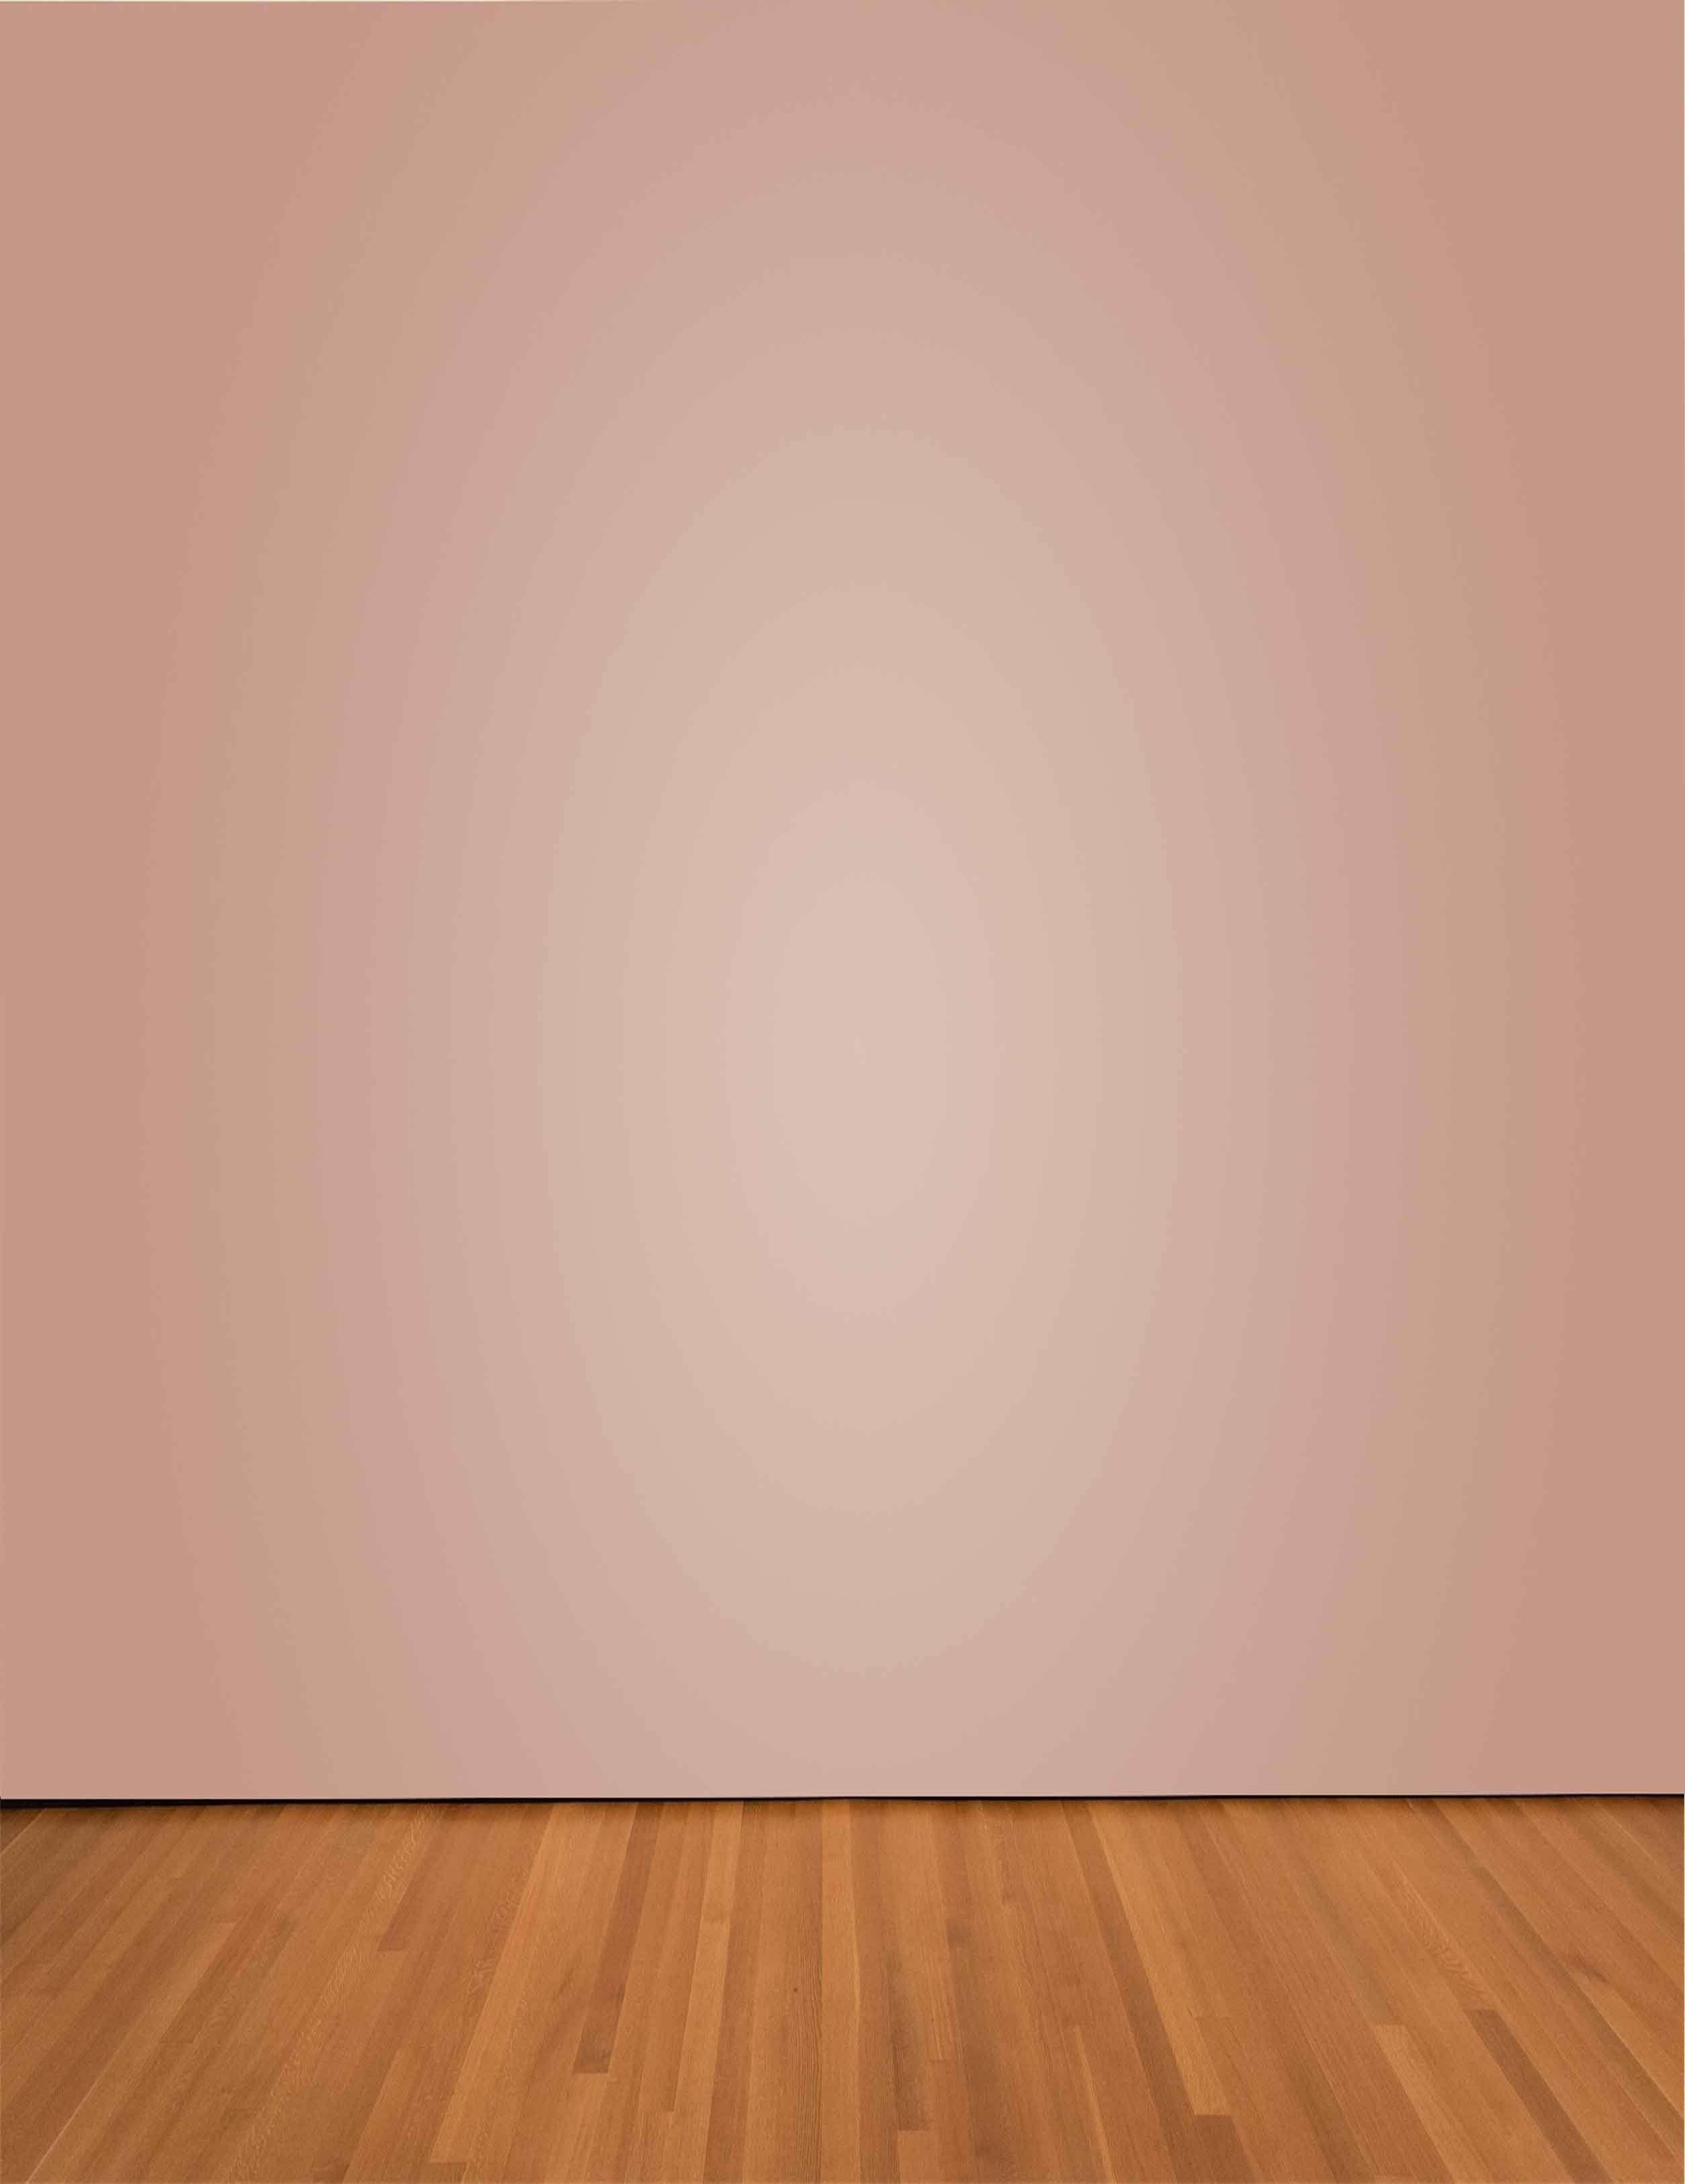 Solid Peach Puff Color Wall With Wood Floor Backdrop For Photography Shopbackdrop